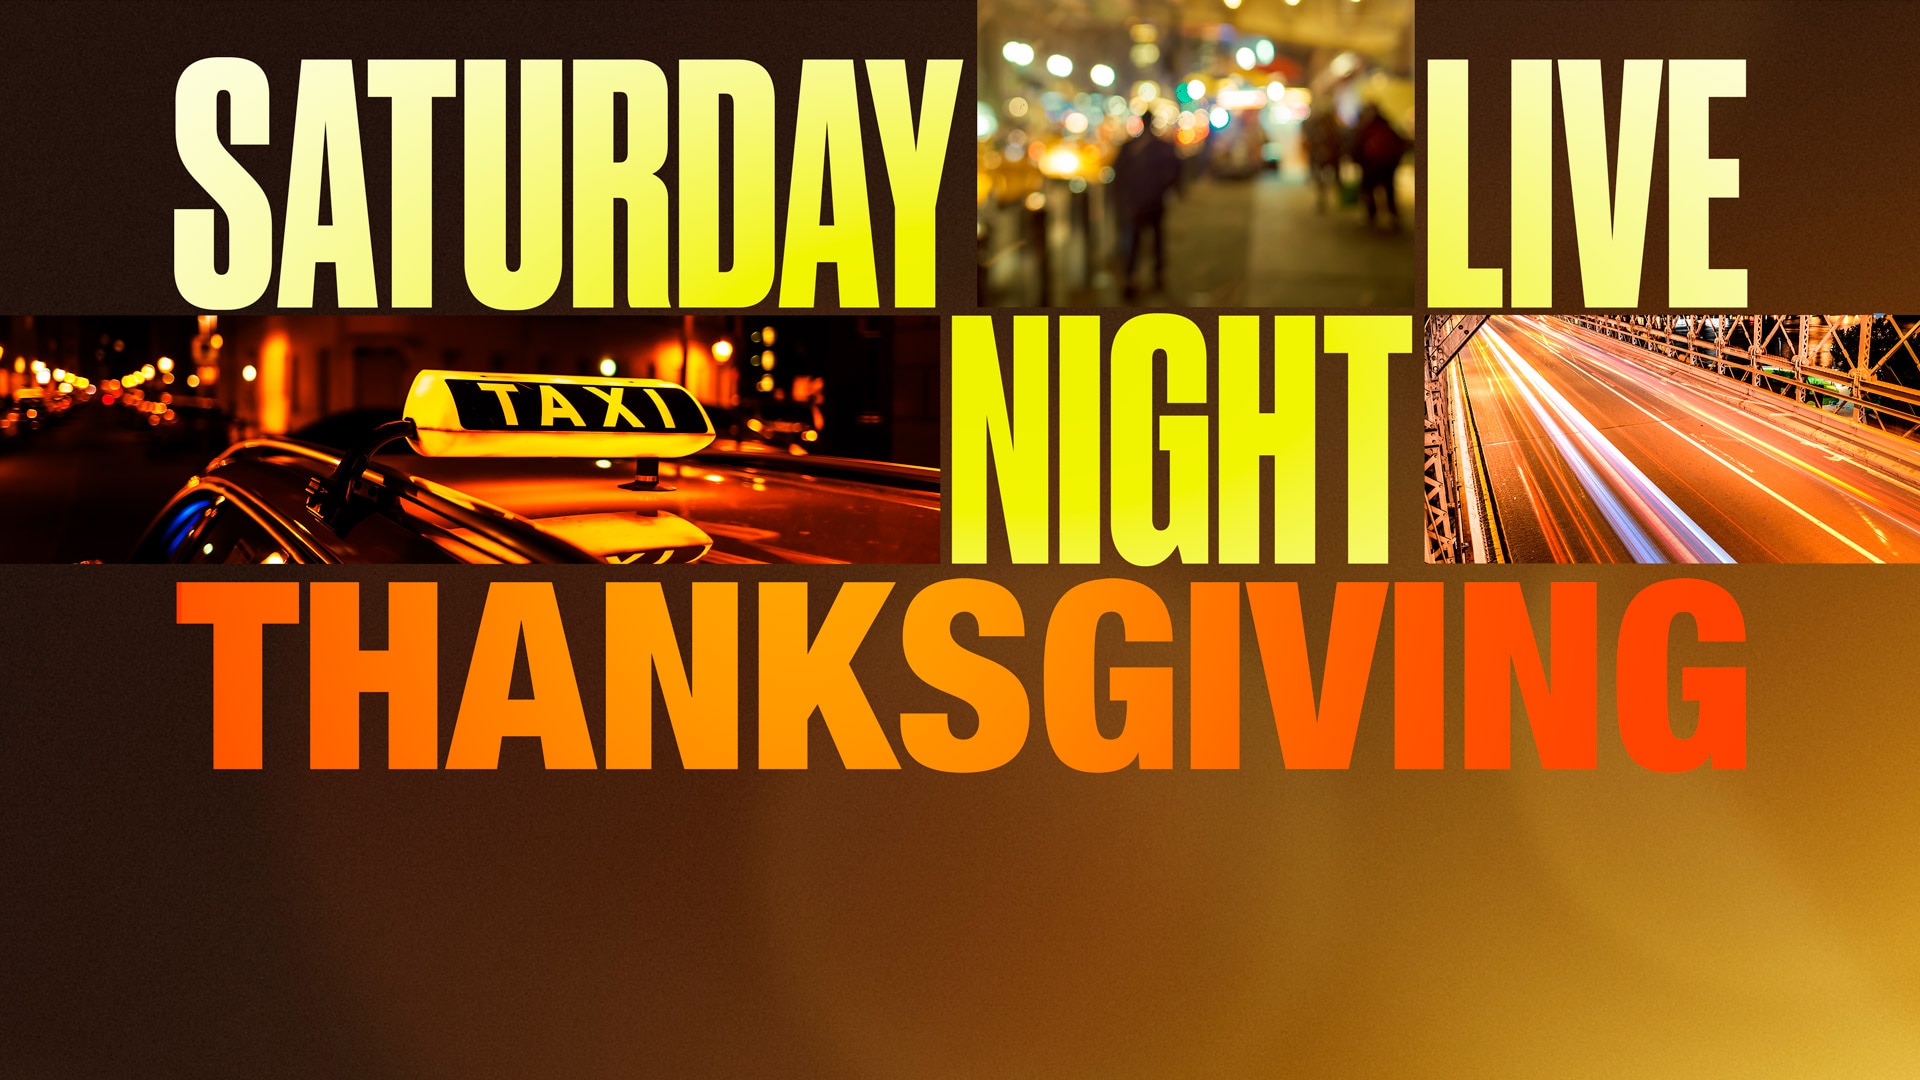 Watch Saturday Night Live Episode A Saturday Night Live Thanksgiving